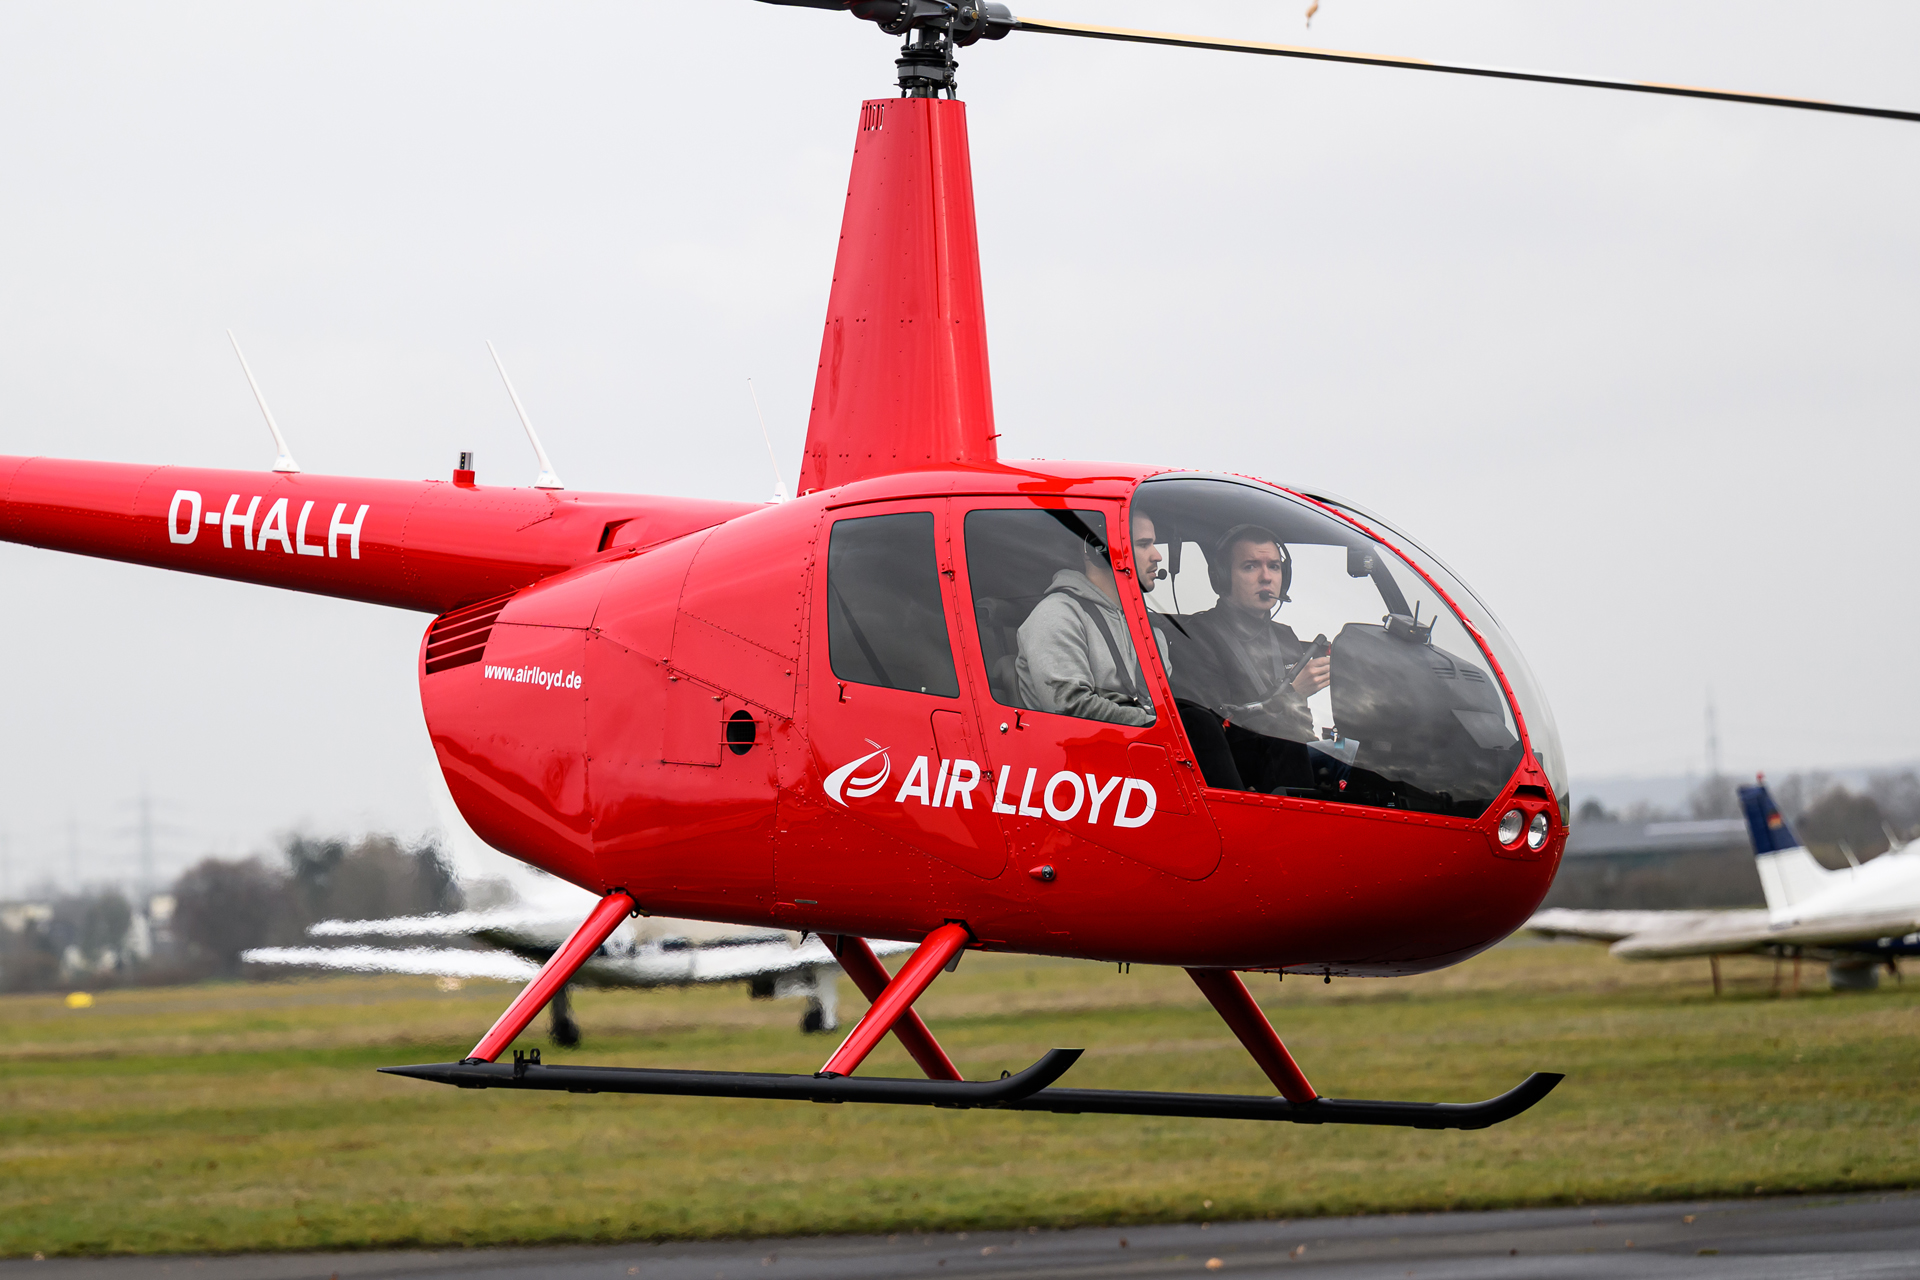 A red Air Lloyd helicopter with pilot taking off